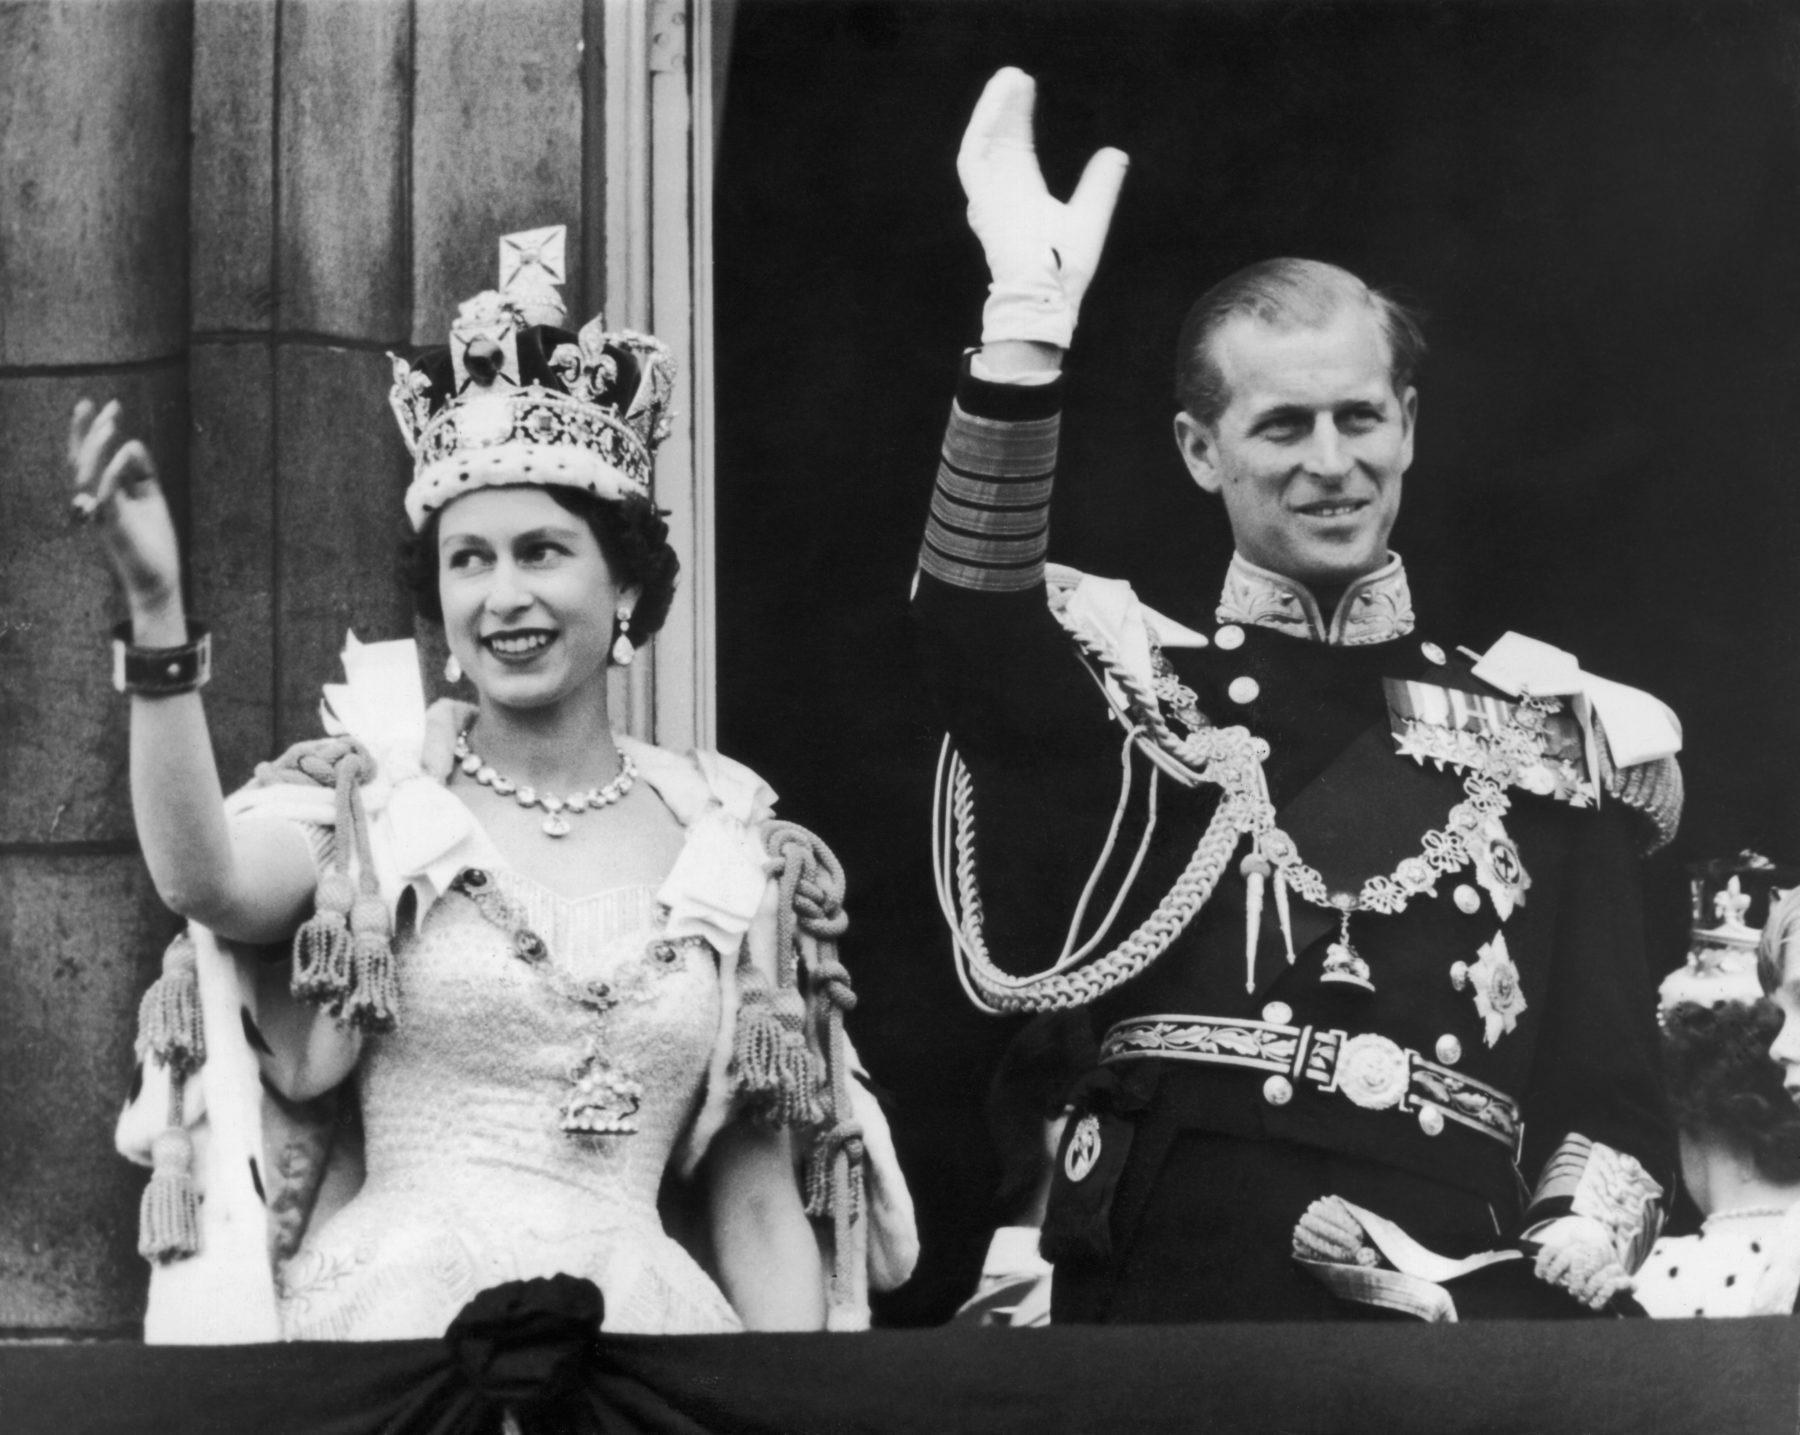 Uncle's abdication led to Elizabeth's reign on the throne